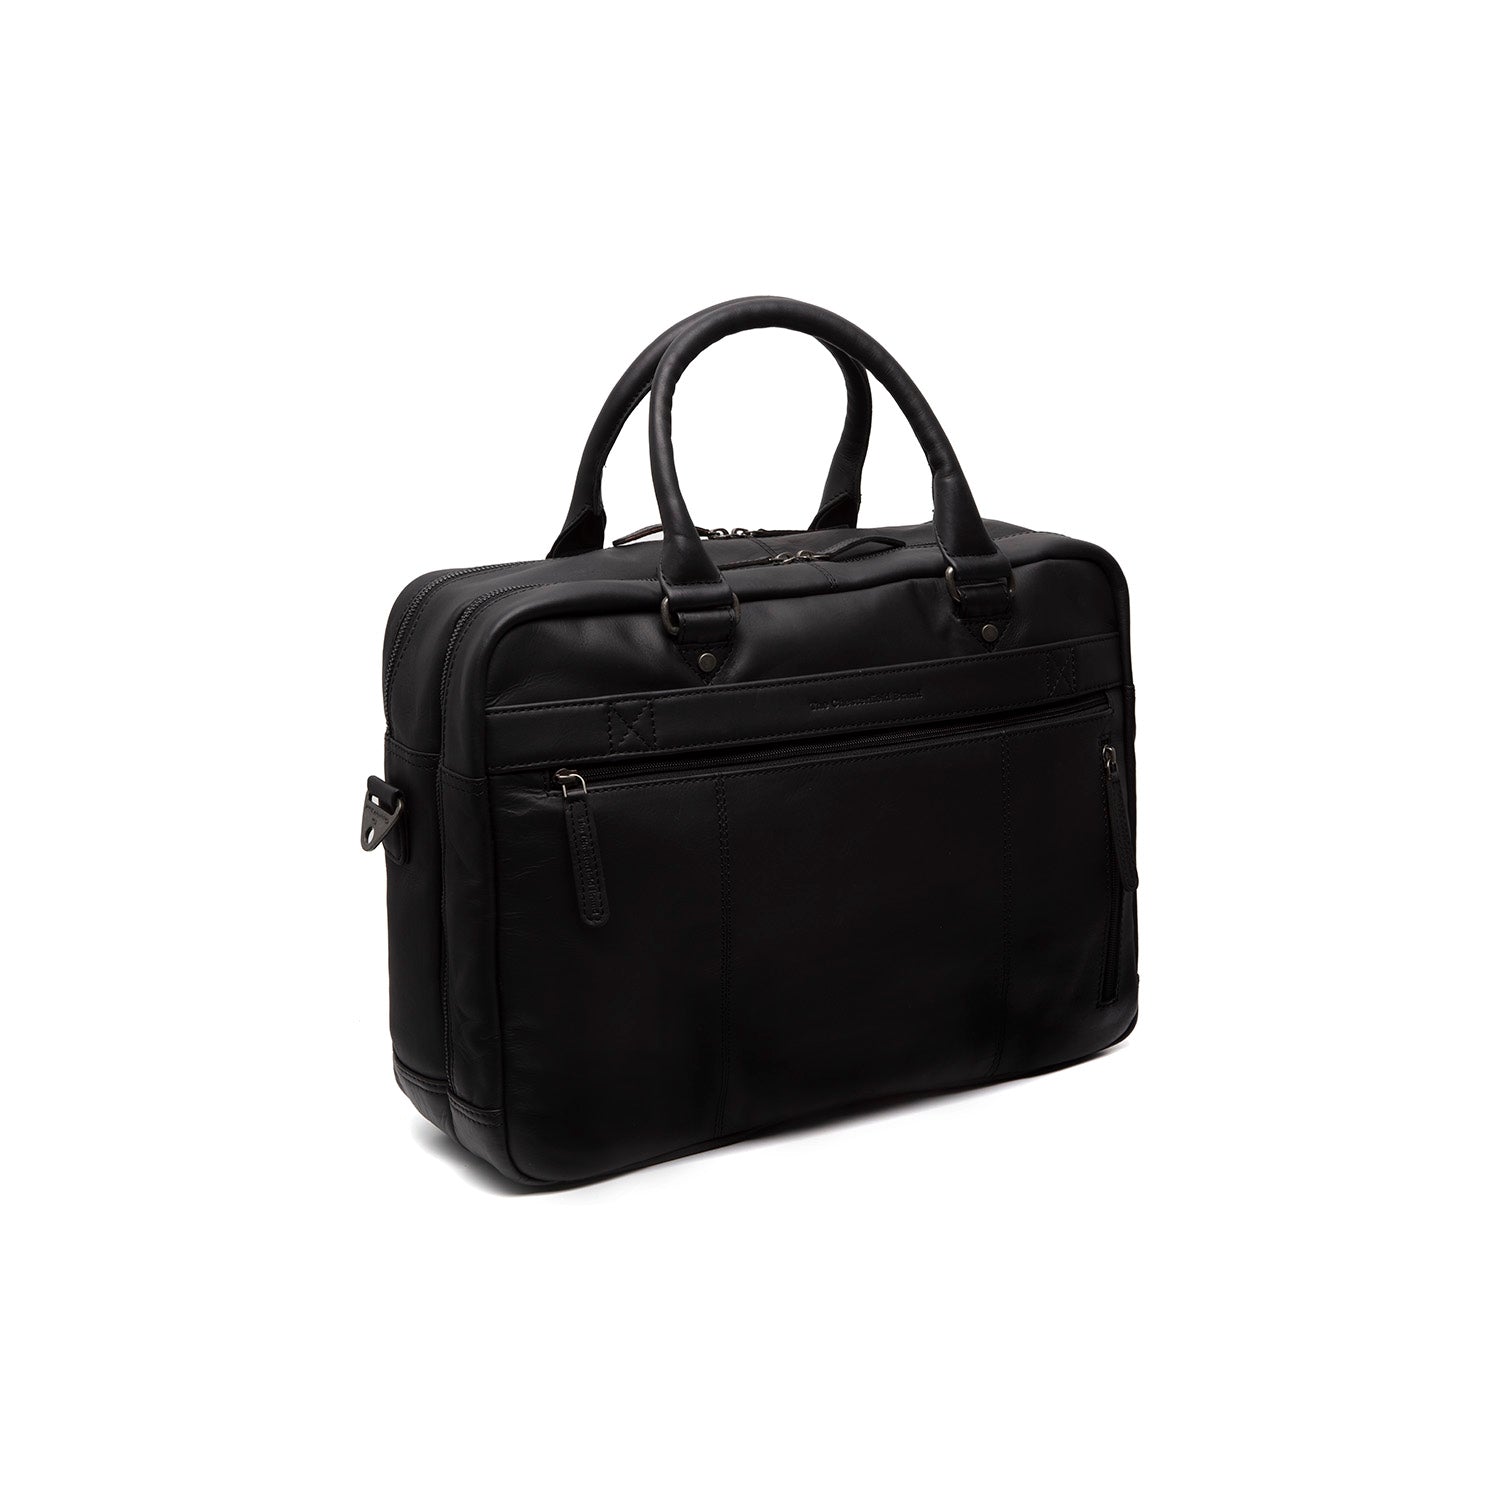 Leather Laptop Bag - The Chesterfield Brand Boston Black